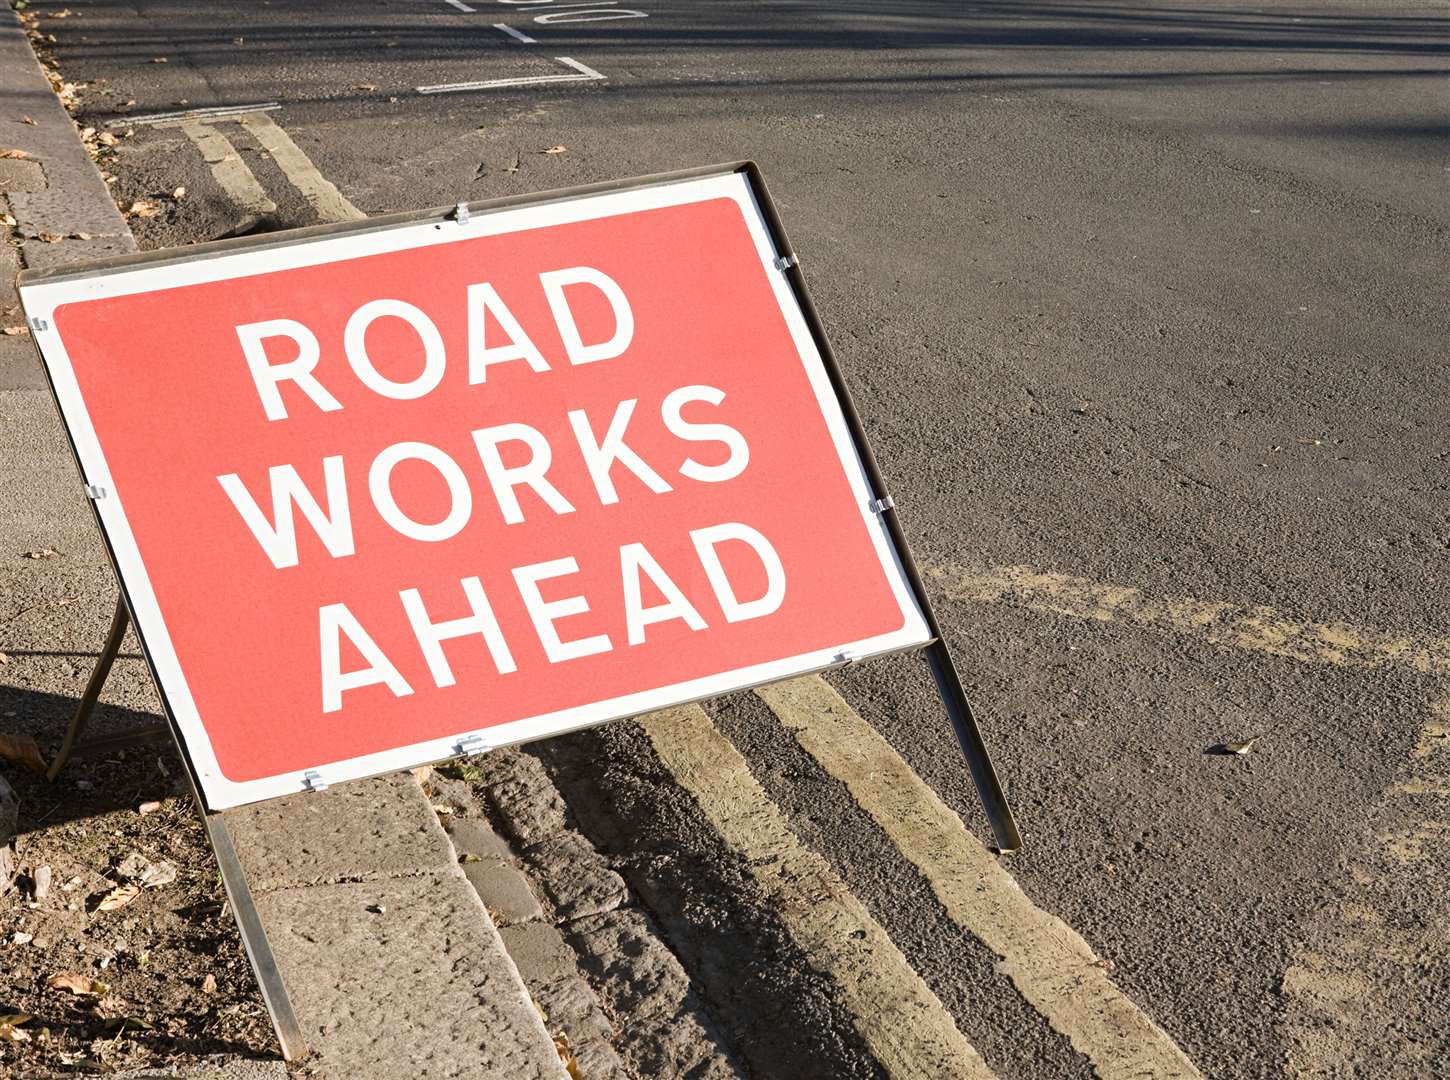 The number of road works in the county has risen dramatically over the last five years.